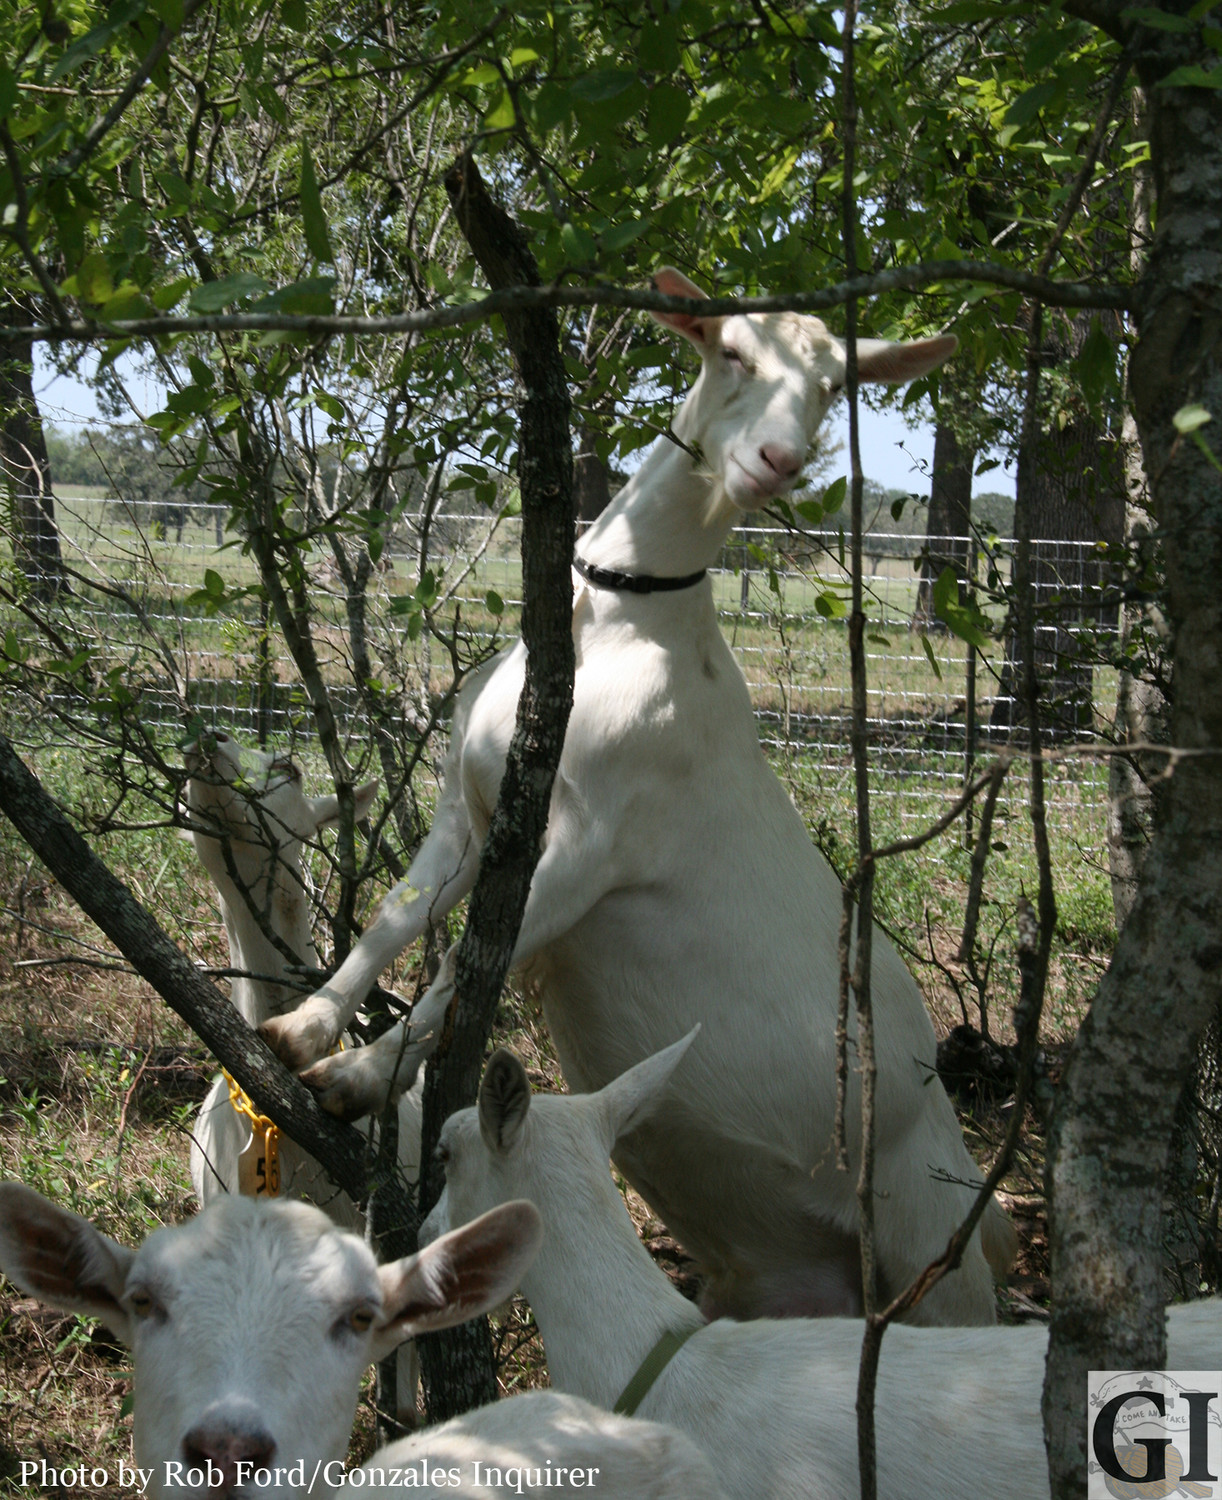 One of Kelly Allen’s dairy goats hits the heights en route to a dinner of fresh mesquite leaves.